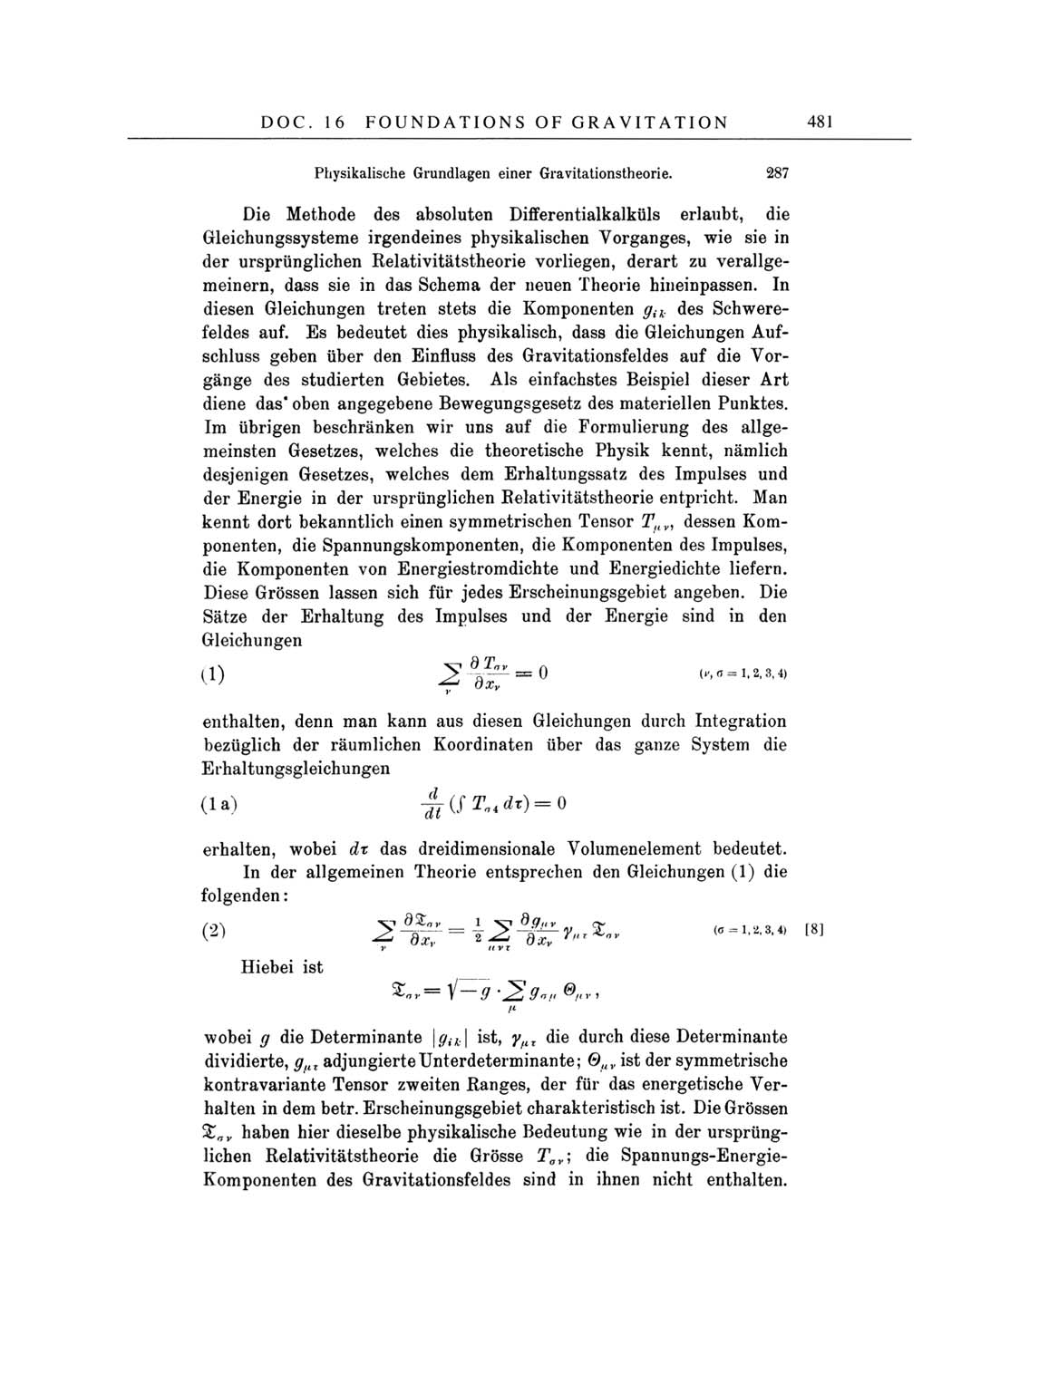 Volume 4: The Swiss Years: Writings 1912-1914 page 481